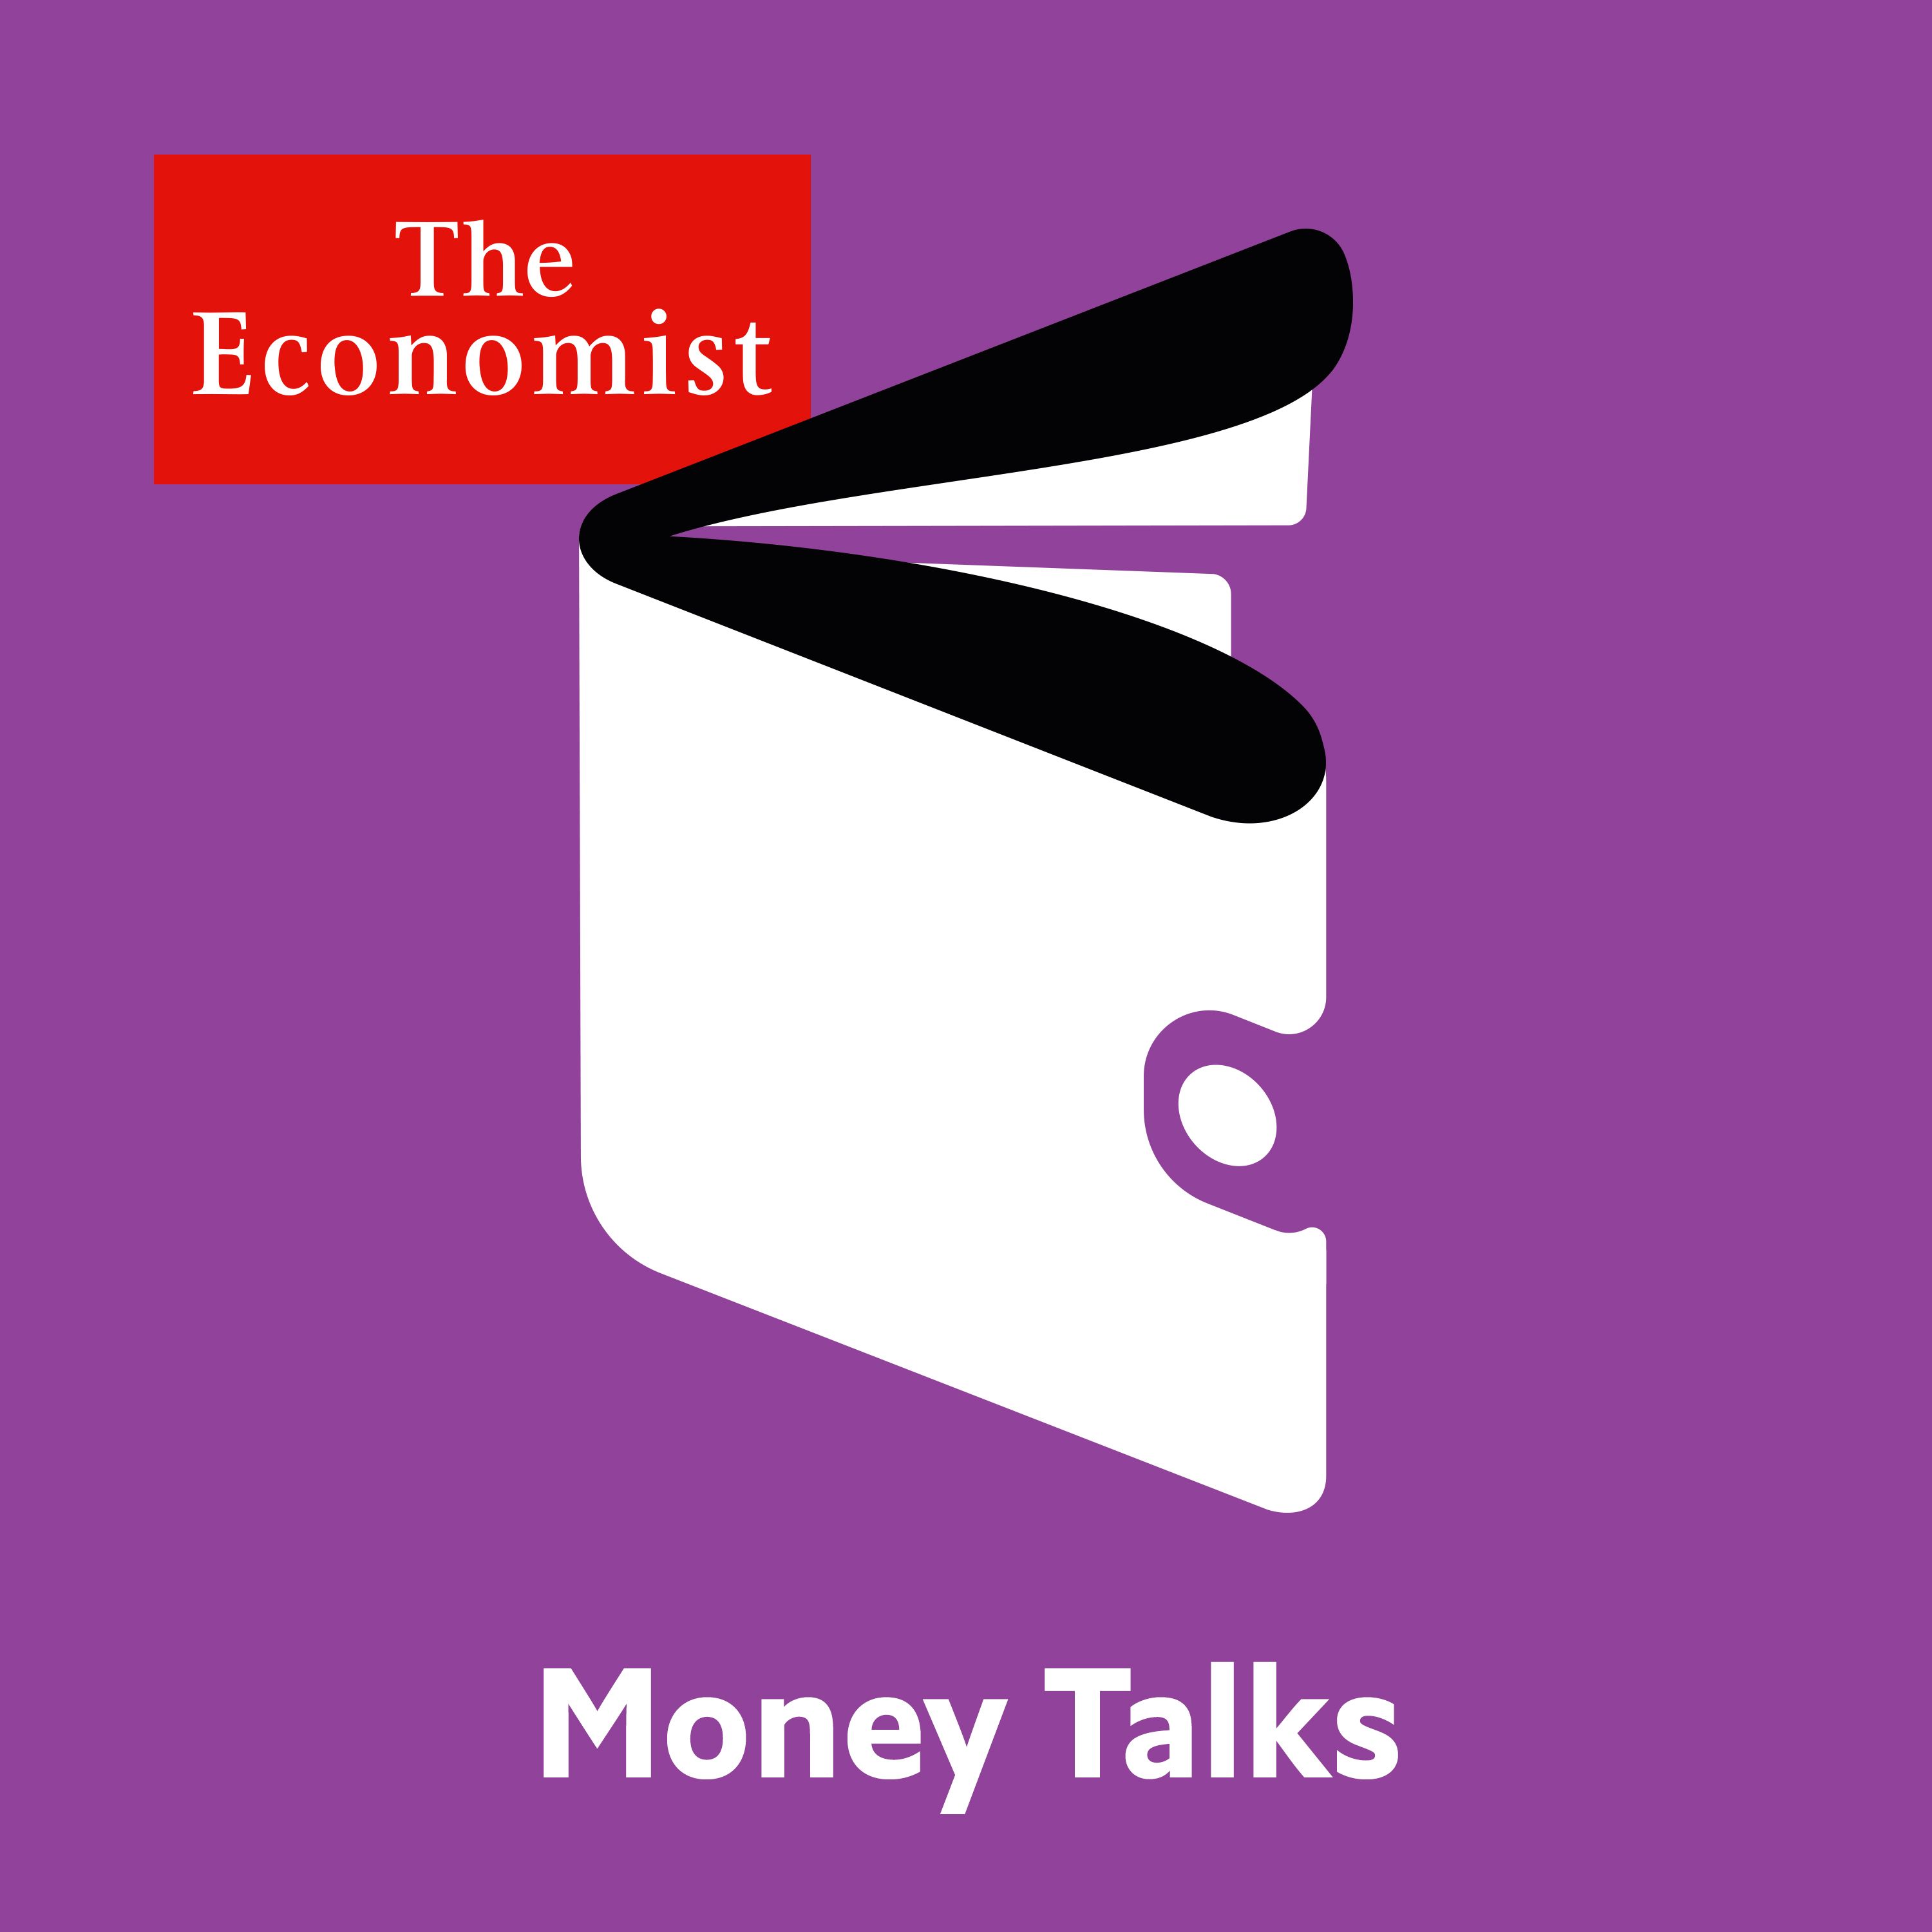 Money Talks: Inflated expectations